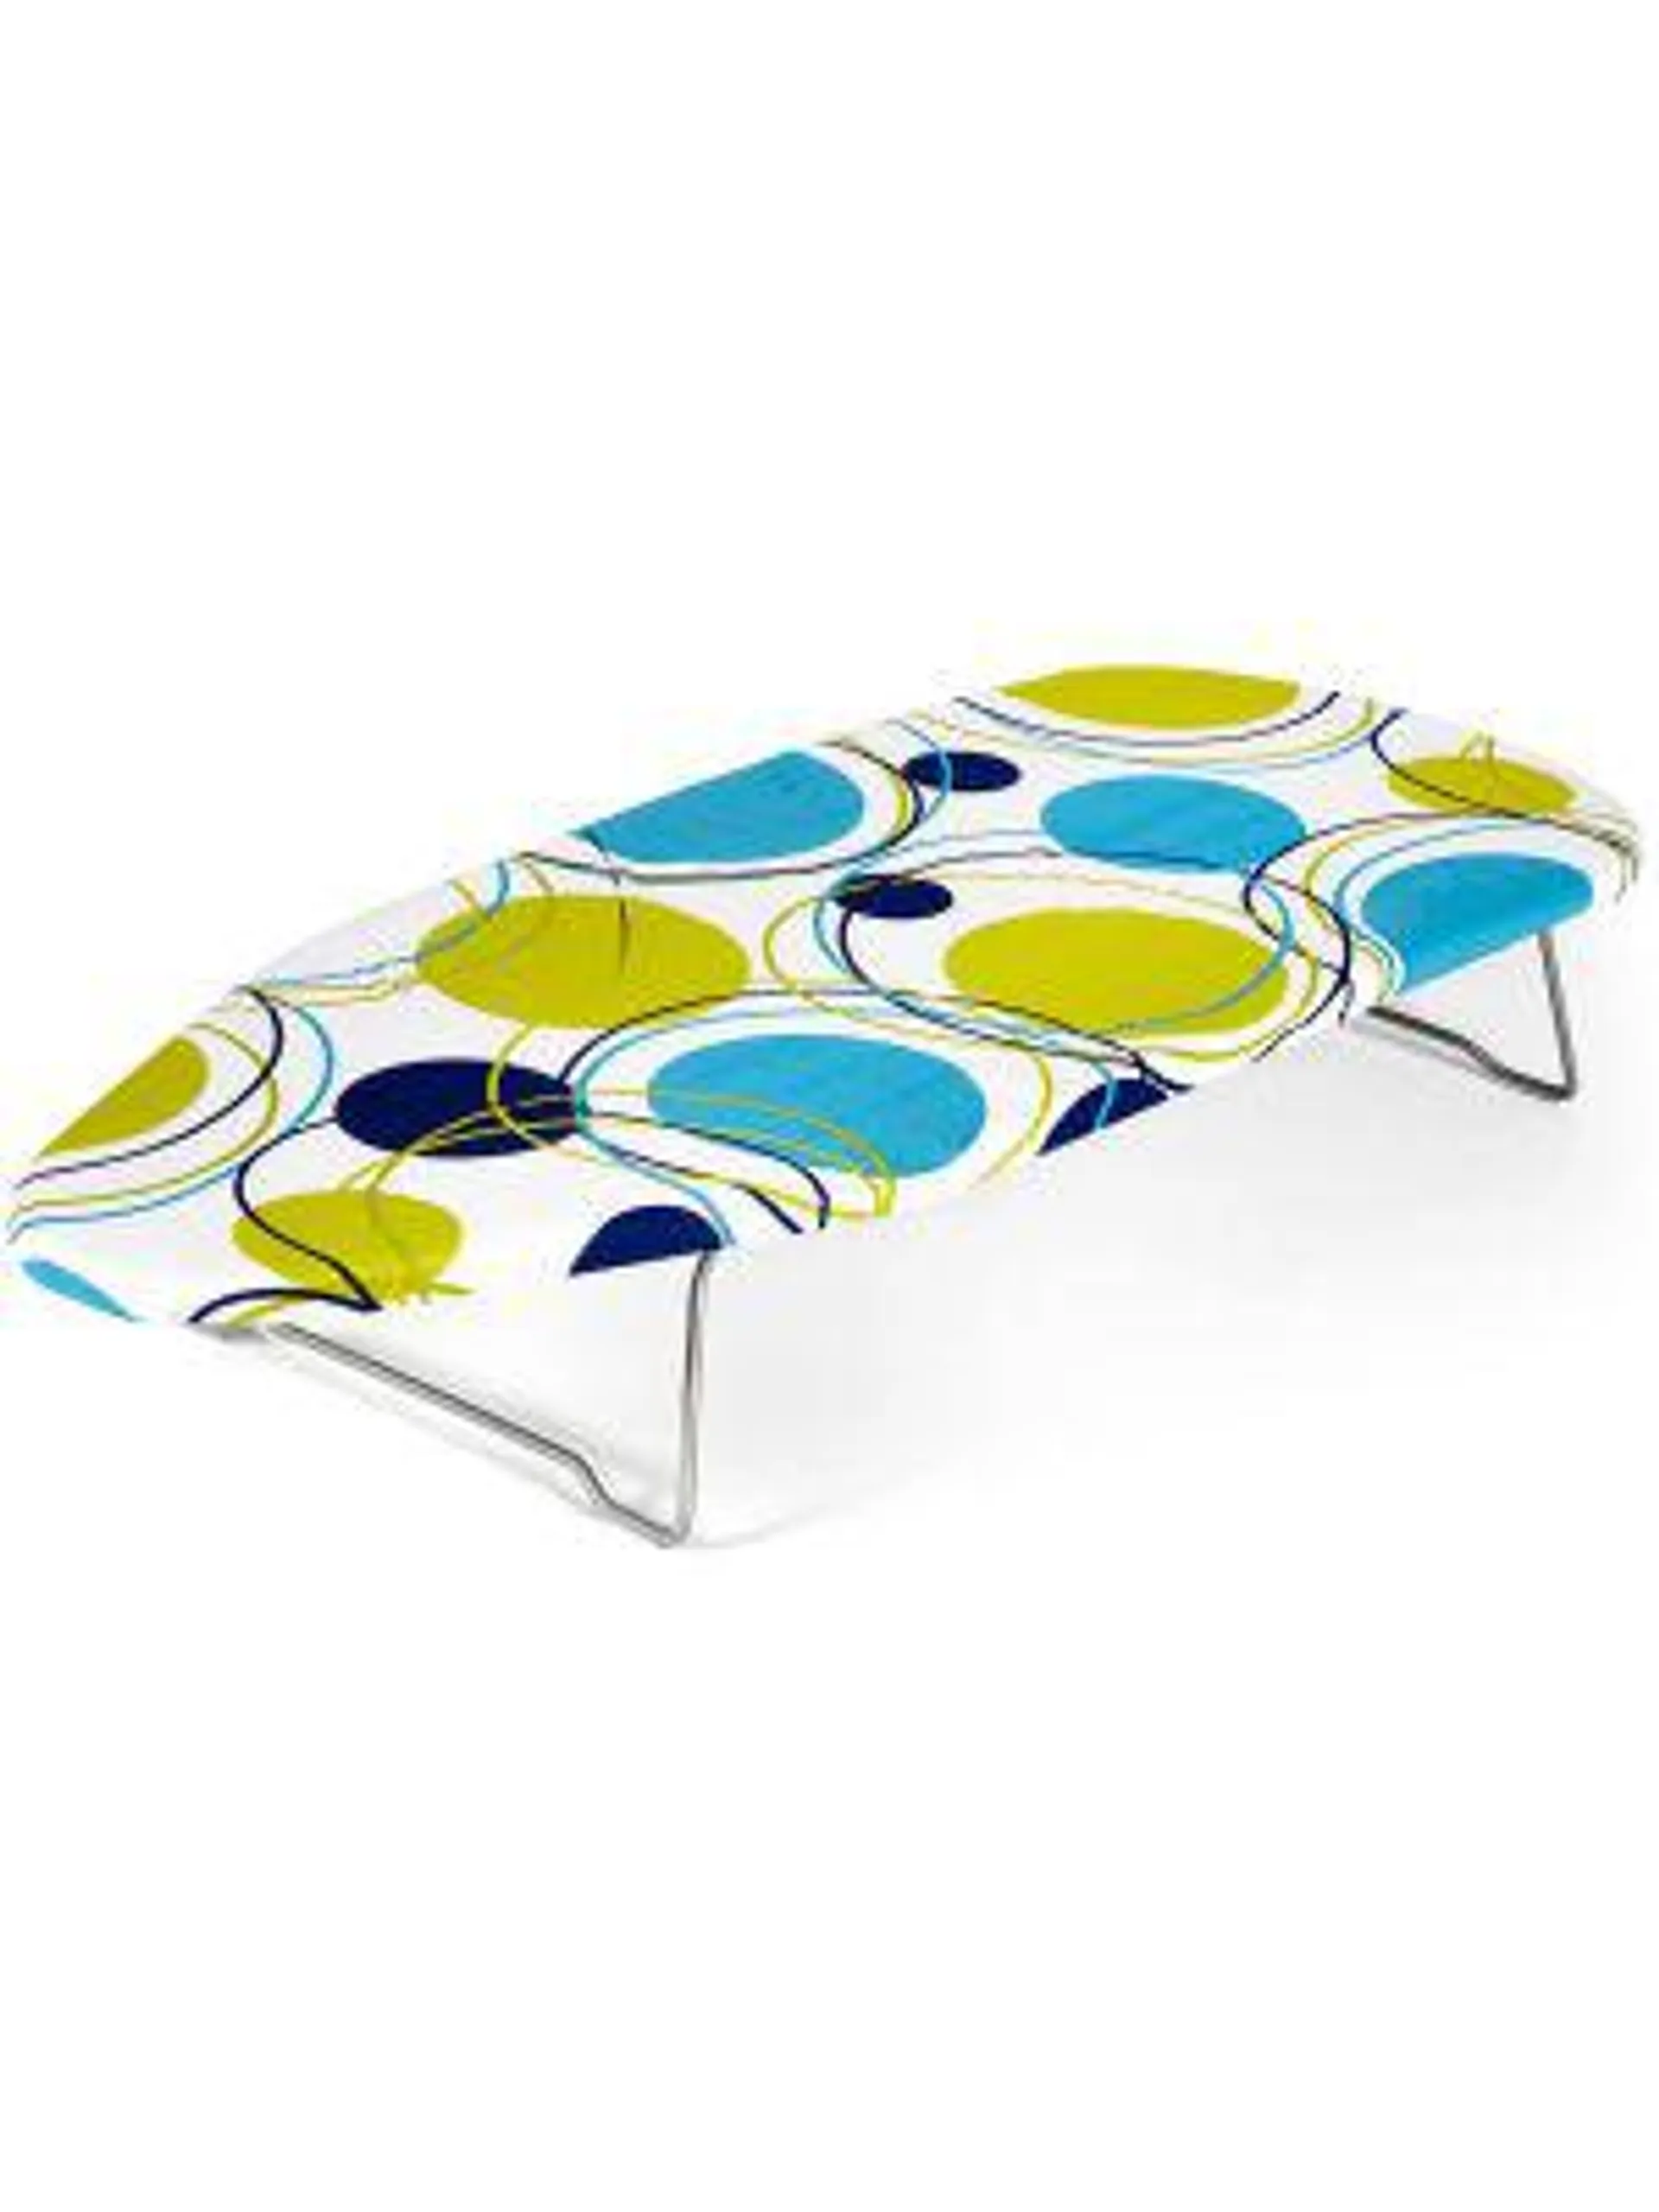 WESTINGHOUSE TABLE TOP IRONING BOARD